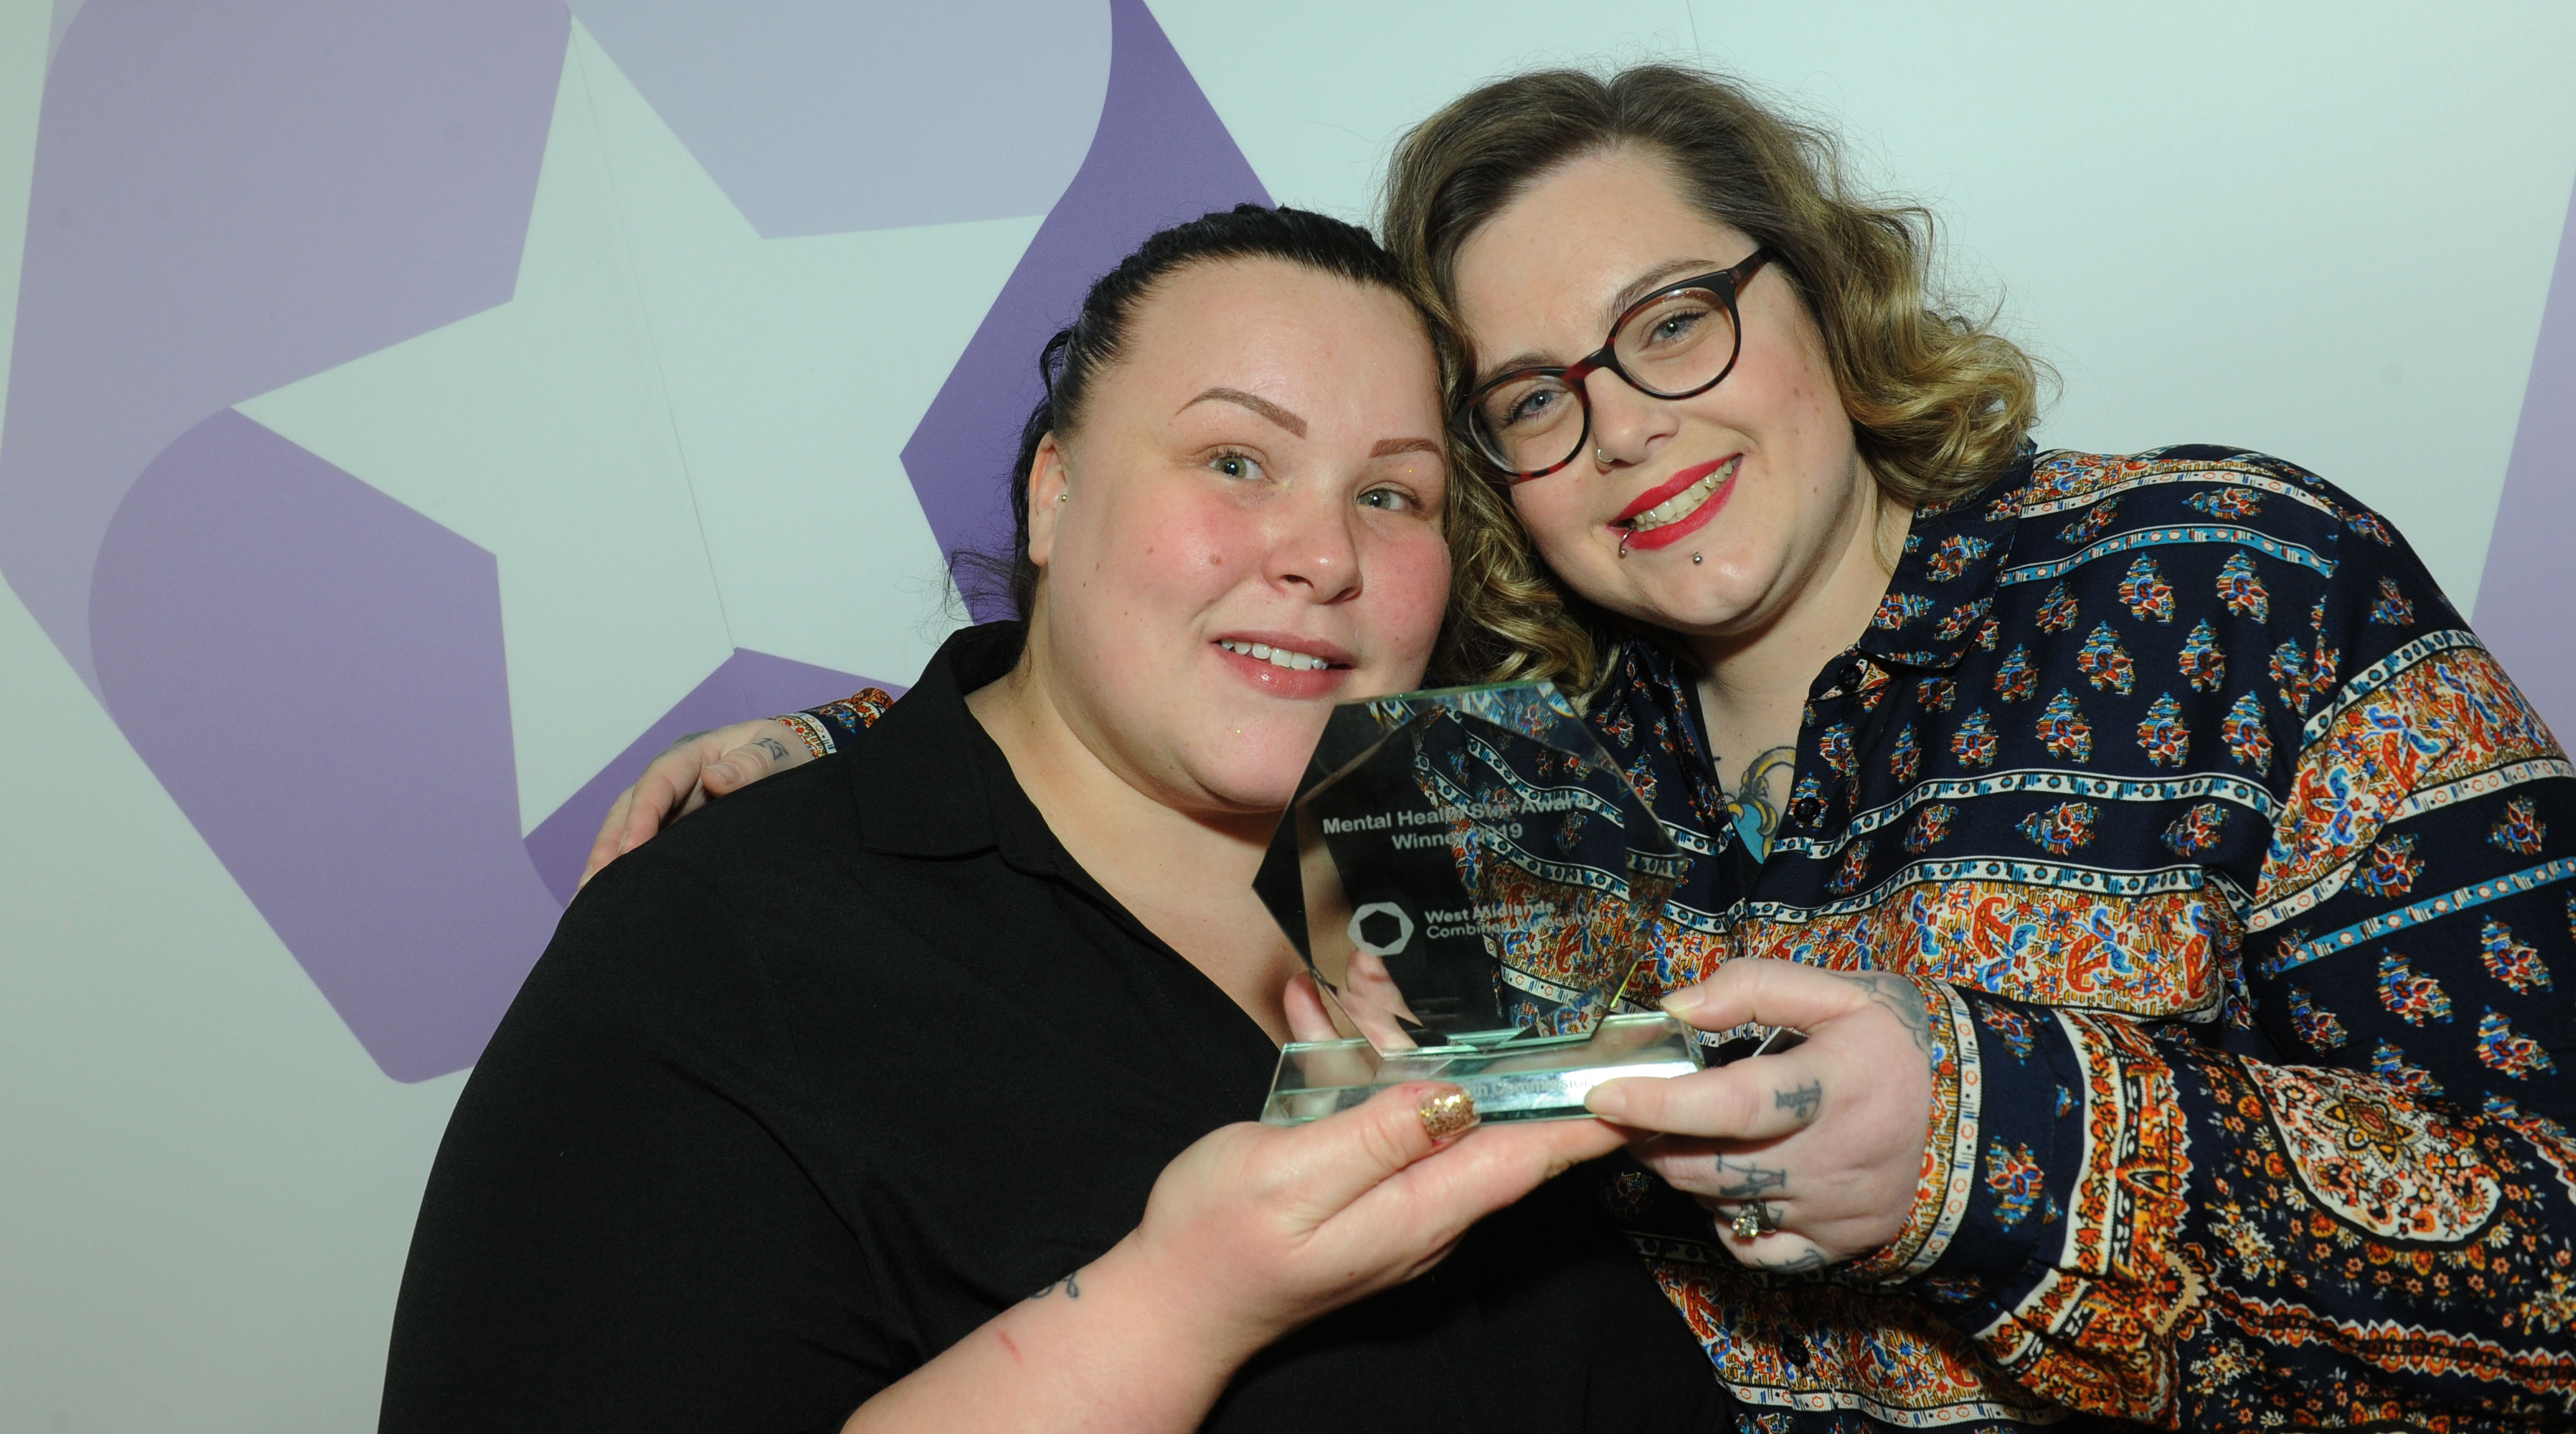 Thrive award winners 2019 Laura Fogarty (left) and Laura Gee